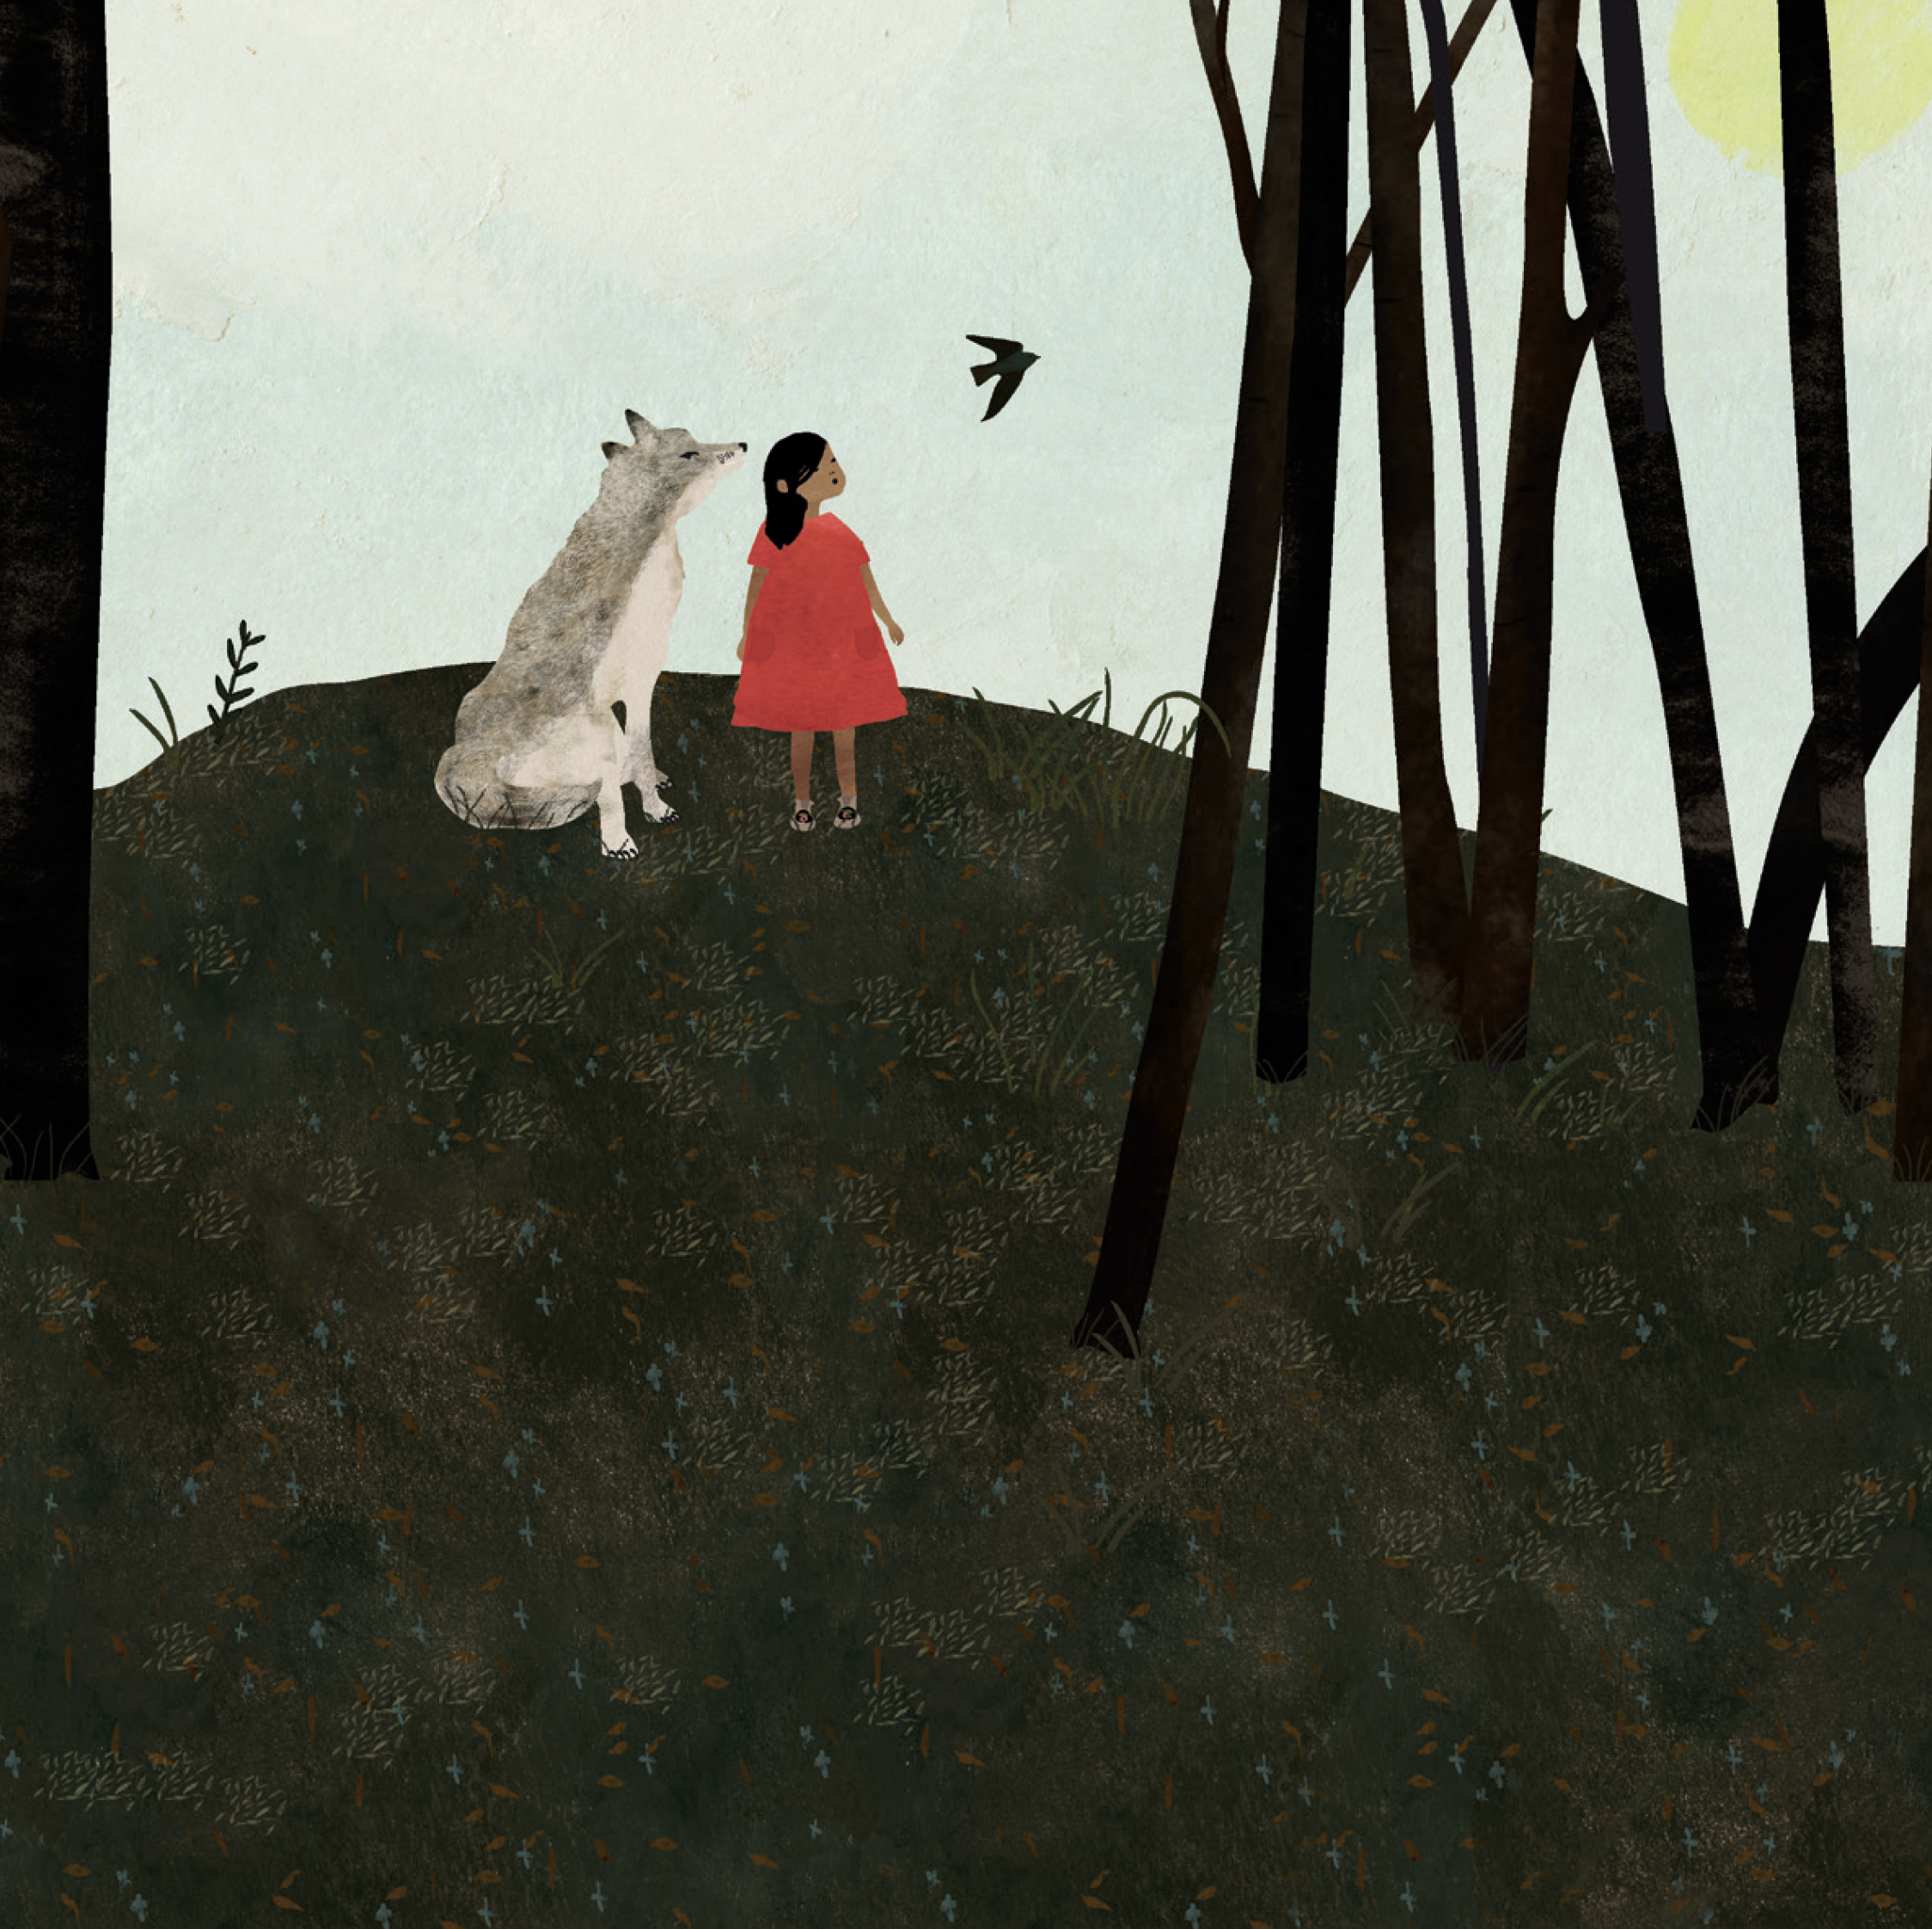  The Girl and the Wolf, words by Katherena Vermette, Theytus Books 